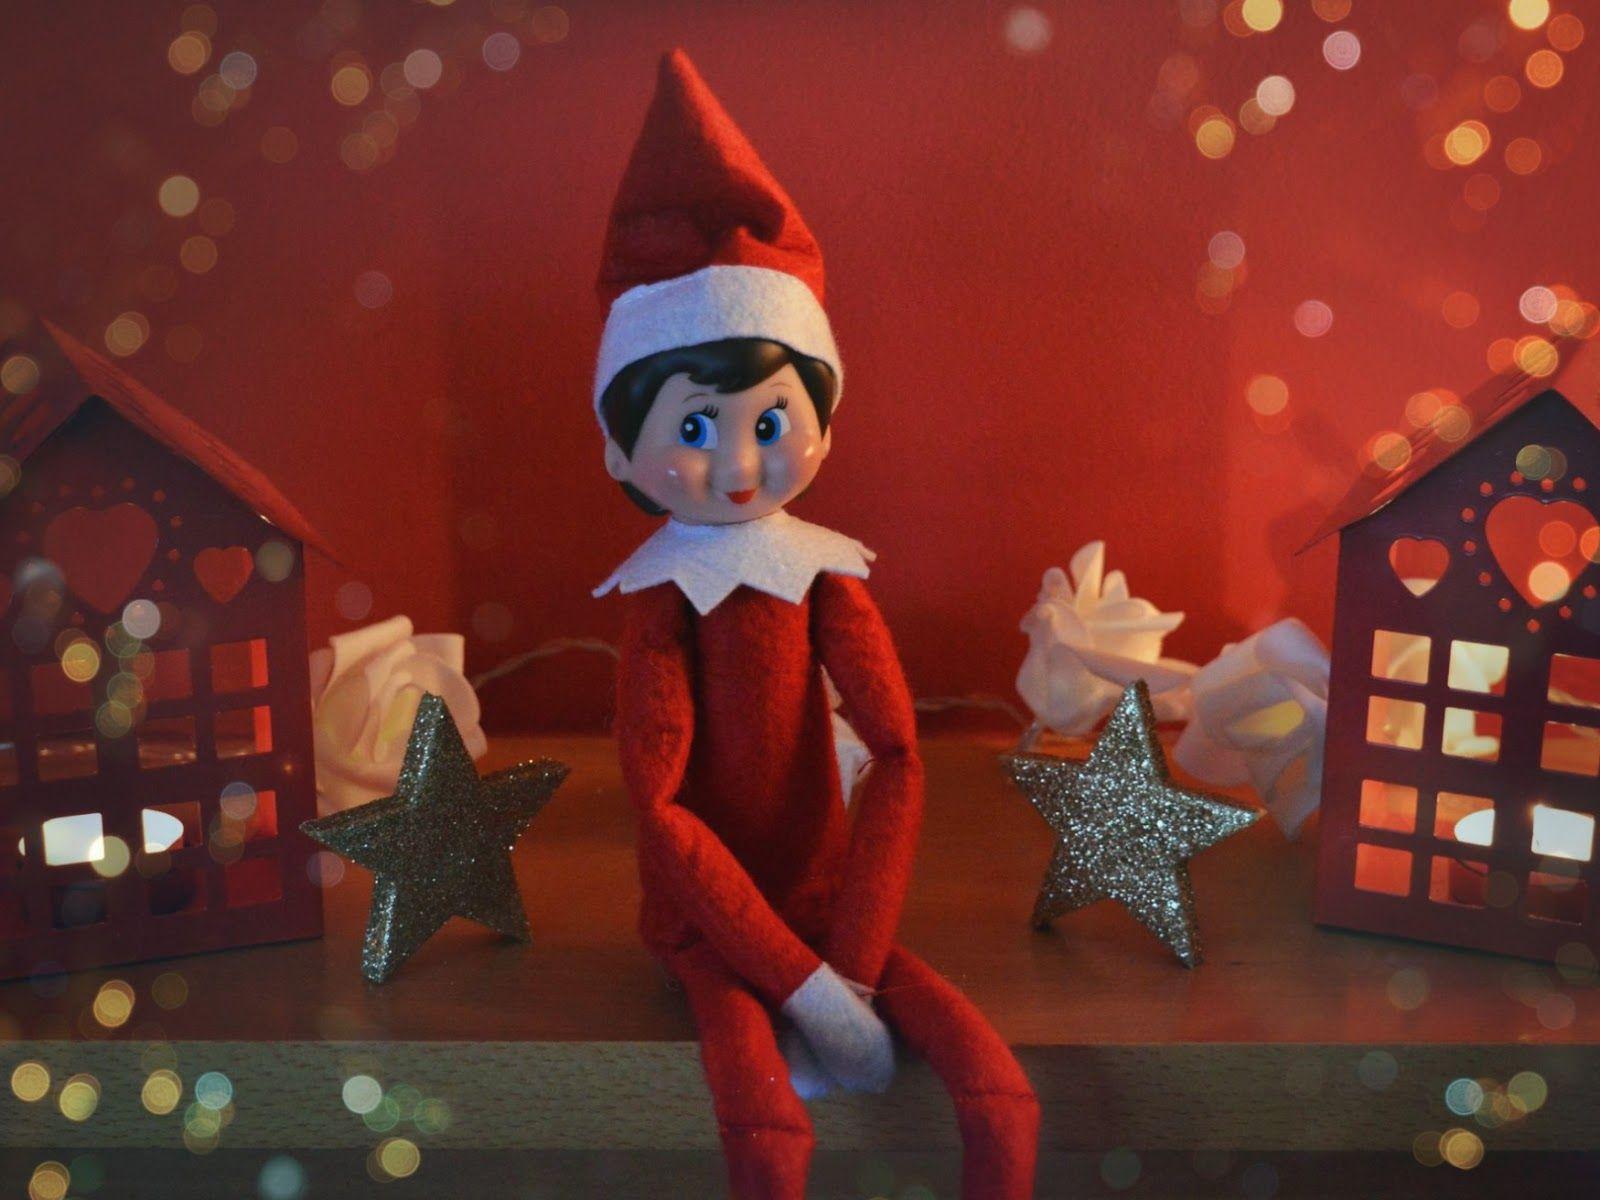 Cute Christmas Elf Wallpapers Top Free Cute Christmas Elf Backgrounds Wallpaperaccess